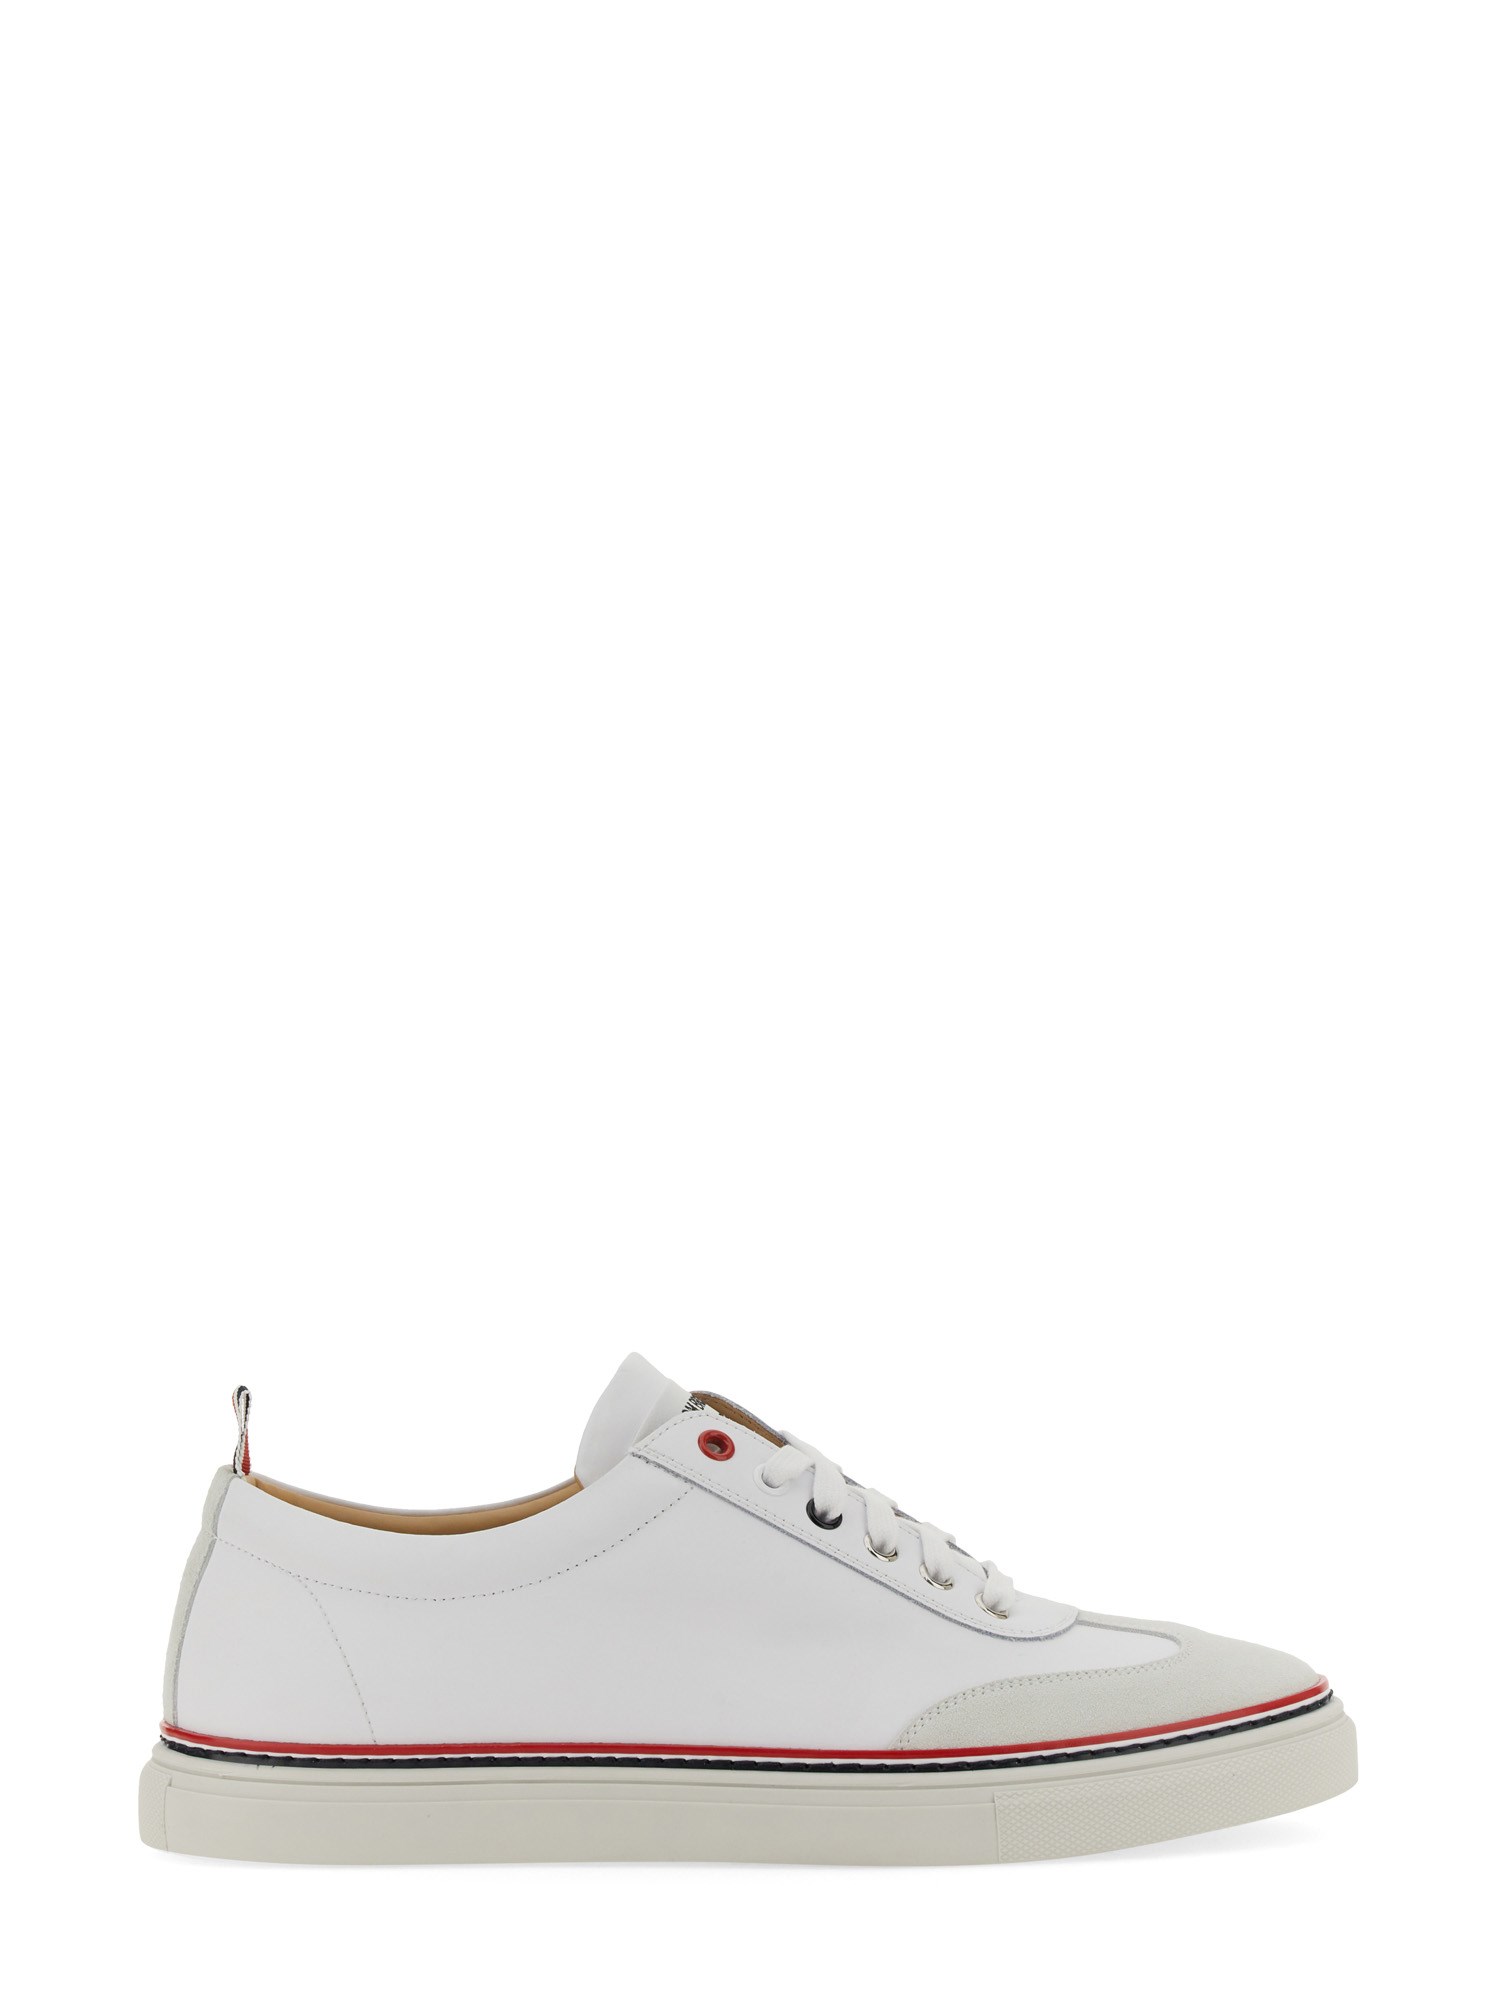 thom browne low-top leather sneaker